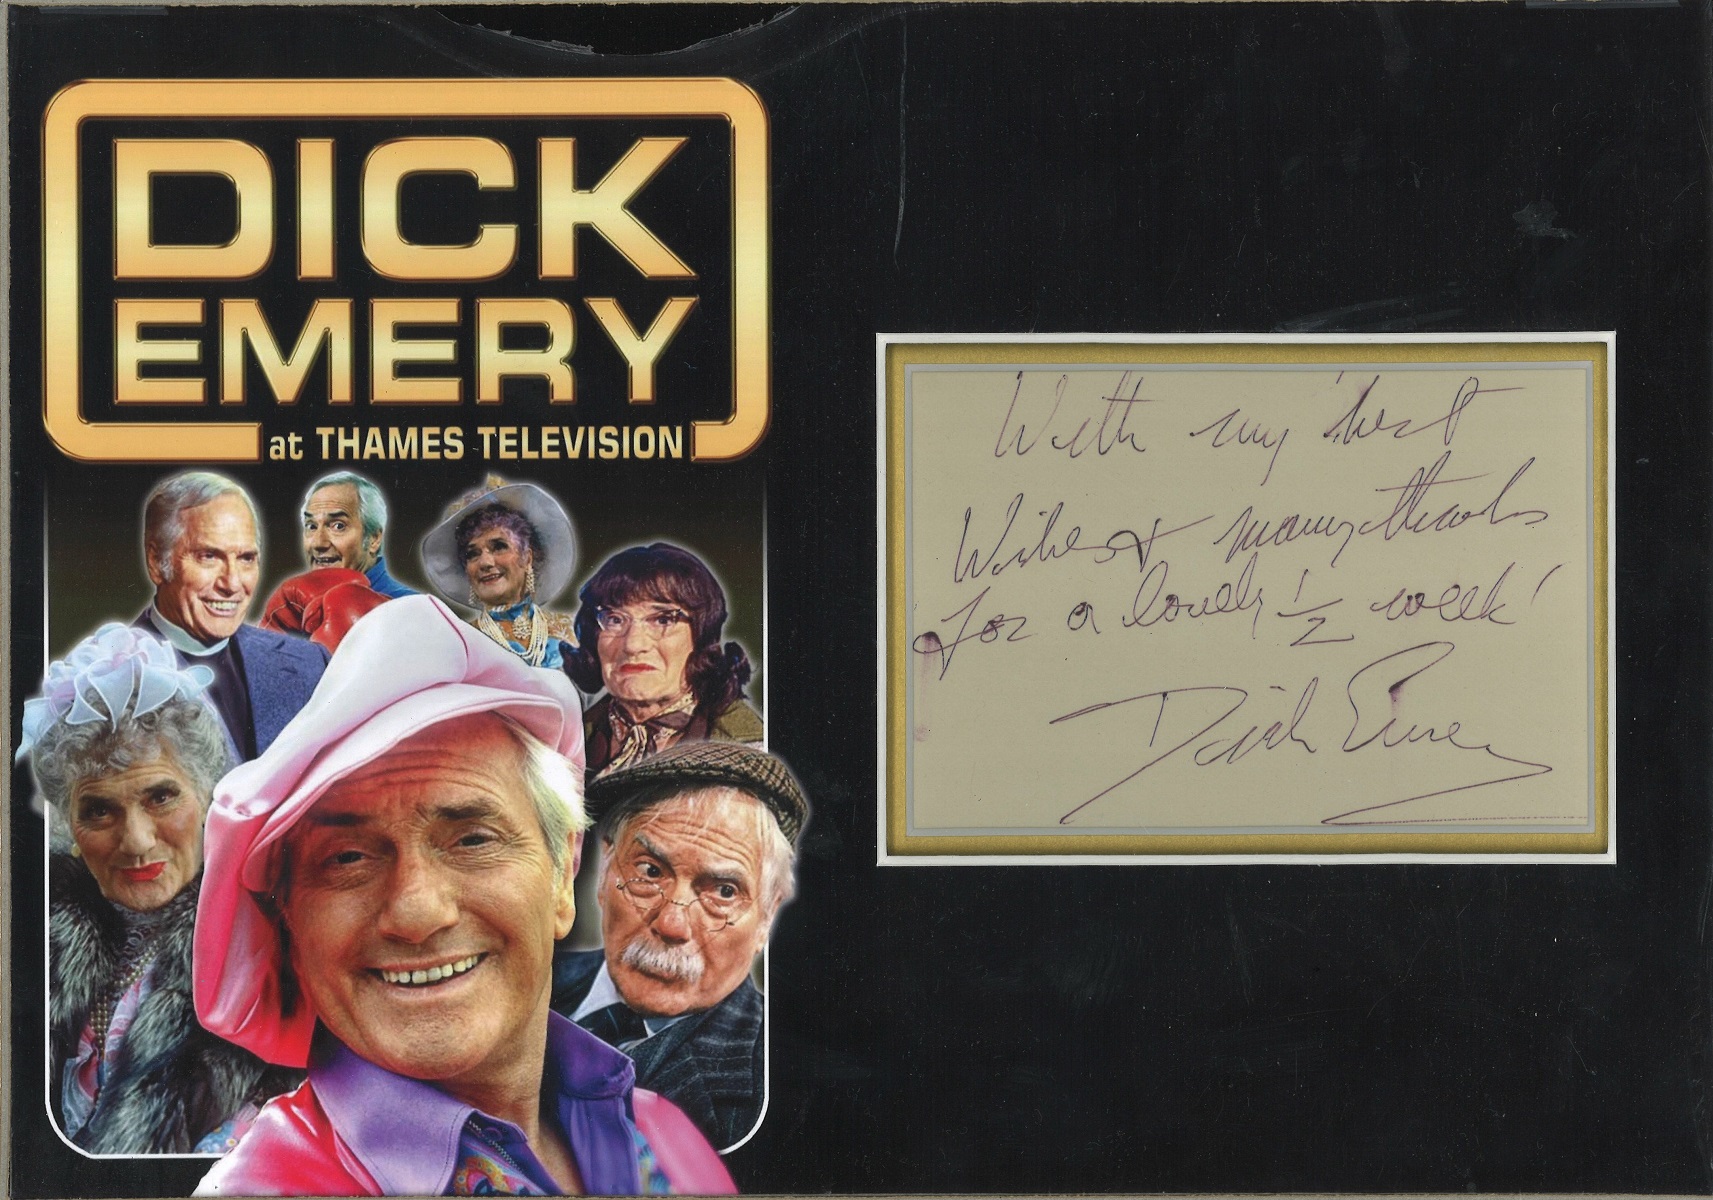 Dick Emery genuine authentic signed autograph display. High quality professionally mounted 14x10